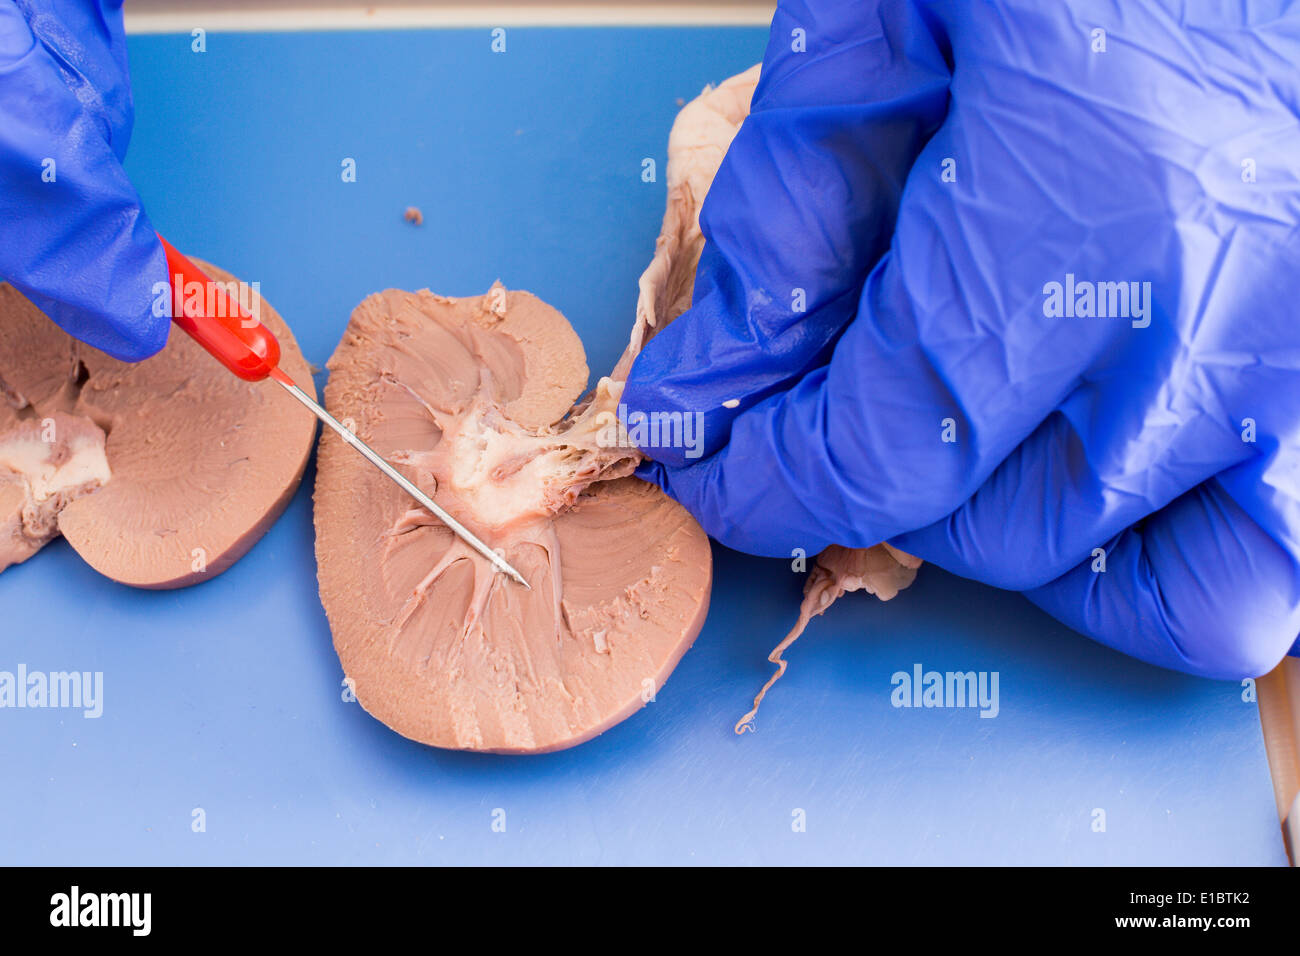 Student studying a dissected sheep kidney in medical school using a cross-section to examine the internal structure Stock Photo